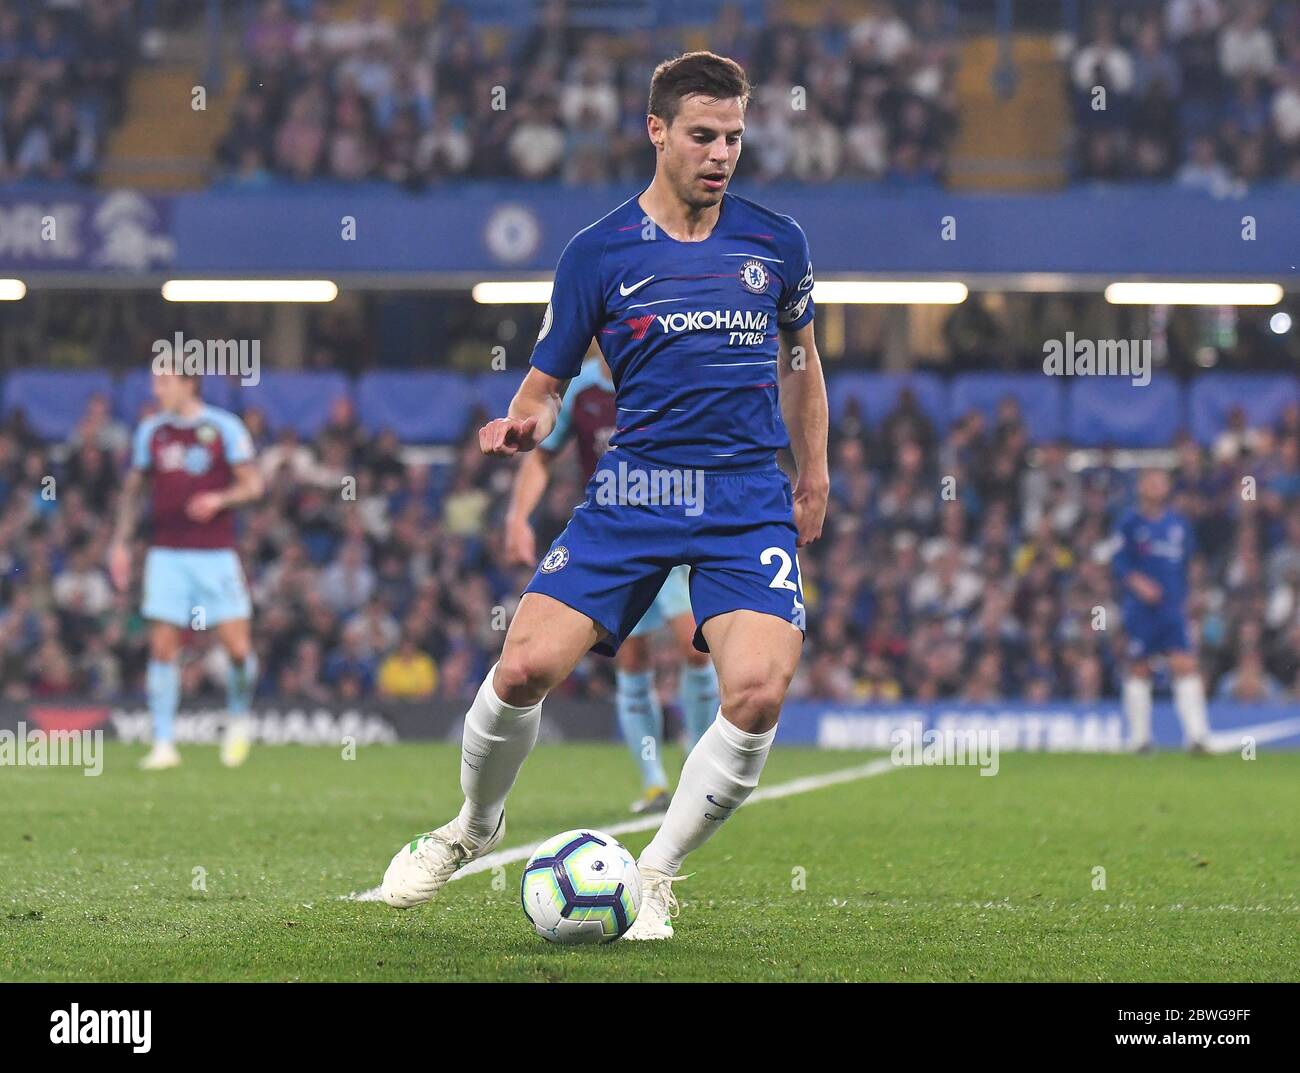 LONDON, ENGLAND - APRIL 22, 2019: Cesar Azpilicueta of Chelsea pictured during the 2018/19 Premier League game between Chelsea FC and Burnley FC. Stock Photo